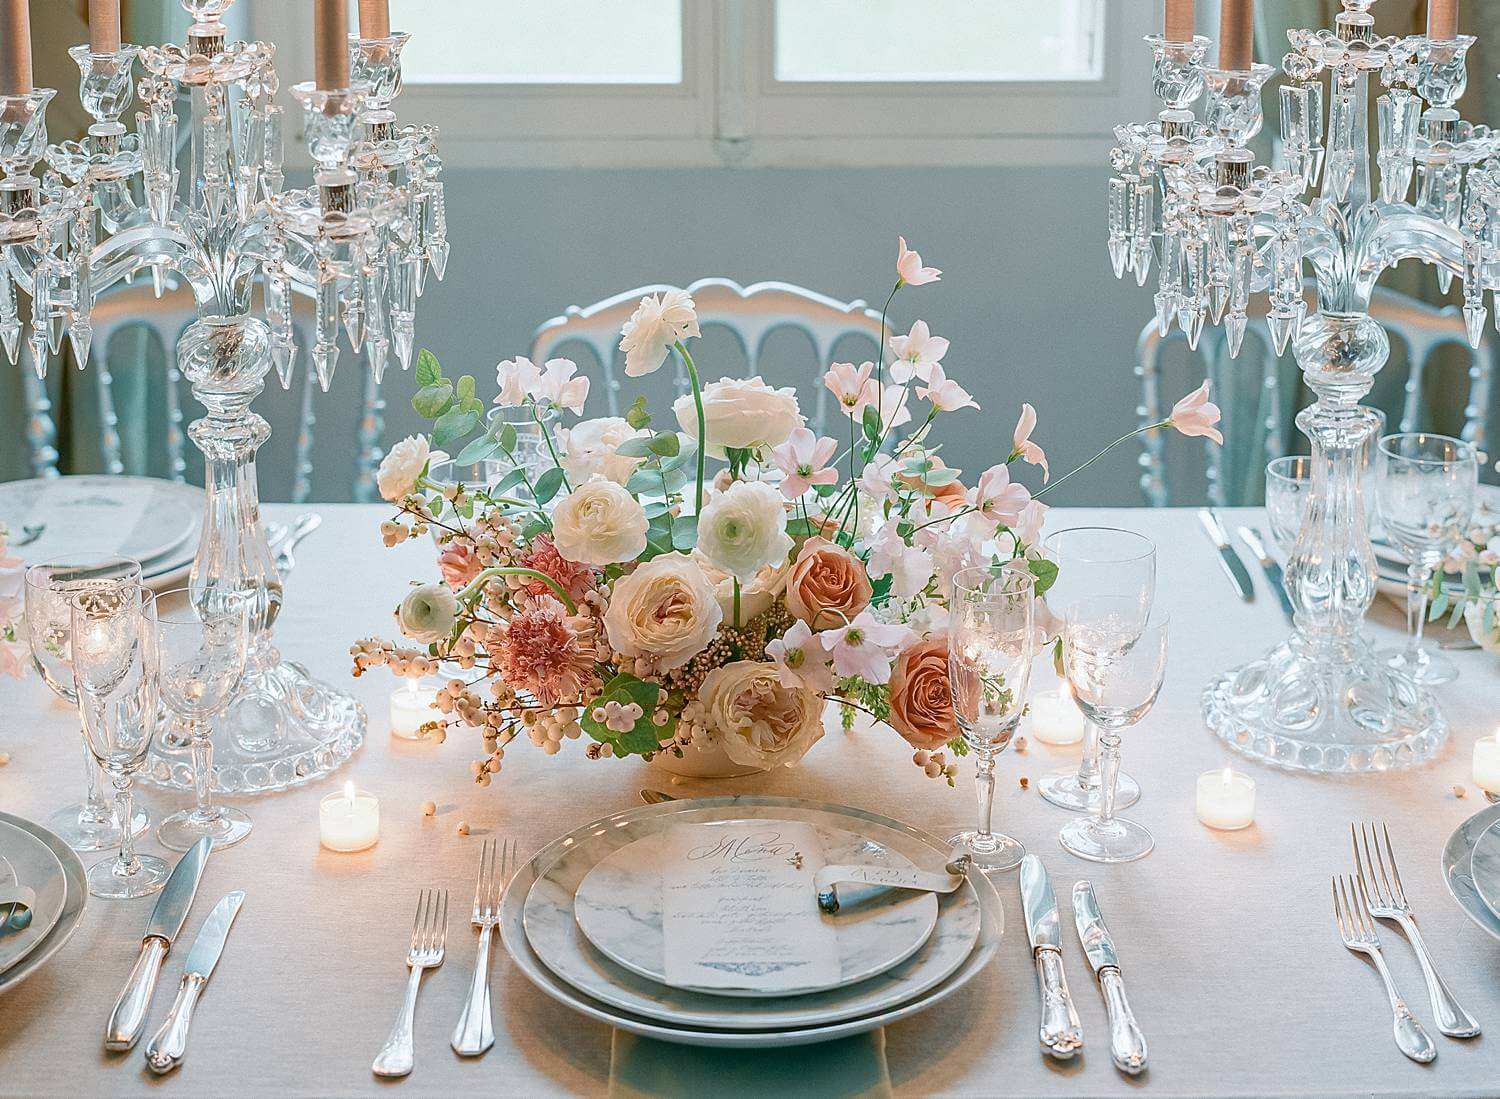 Table details at reception for an elopement at Chateau Couffins in Bordeaux France